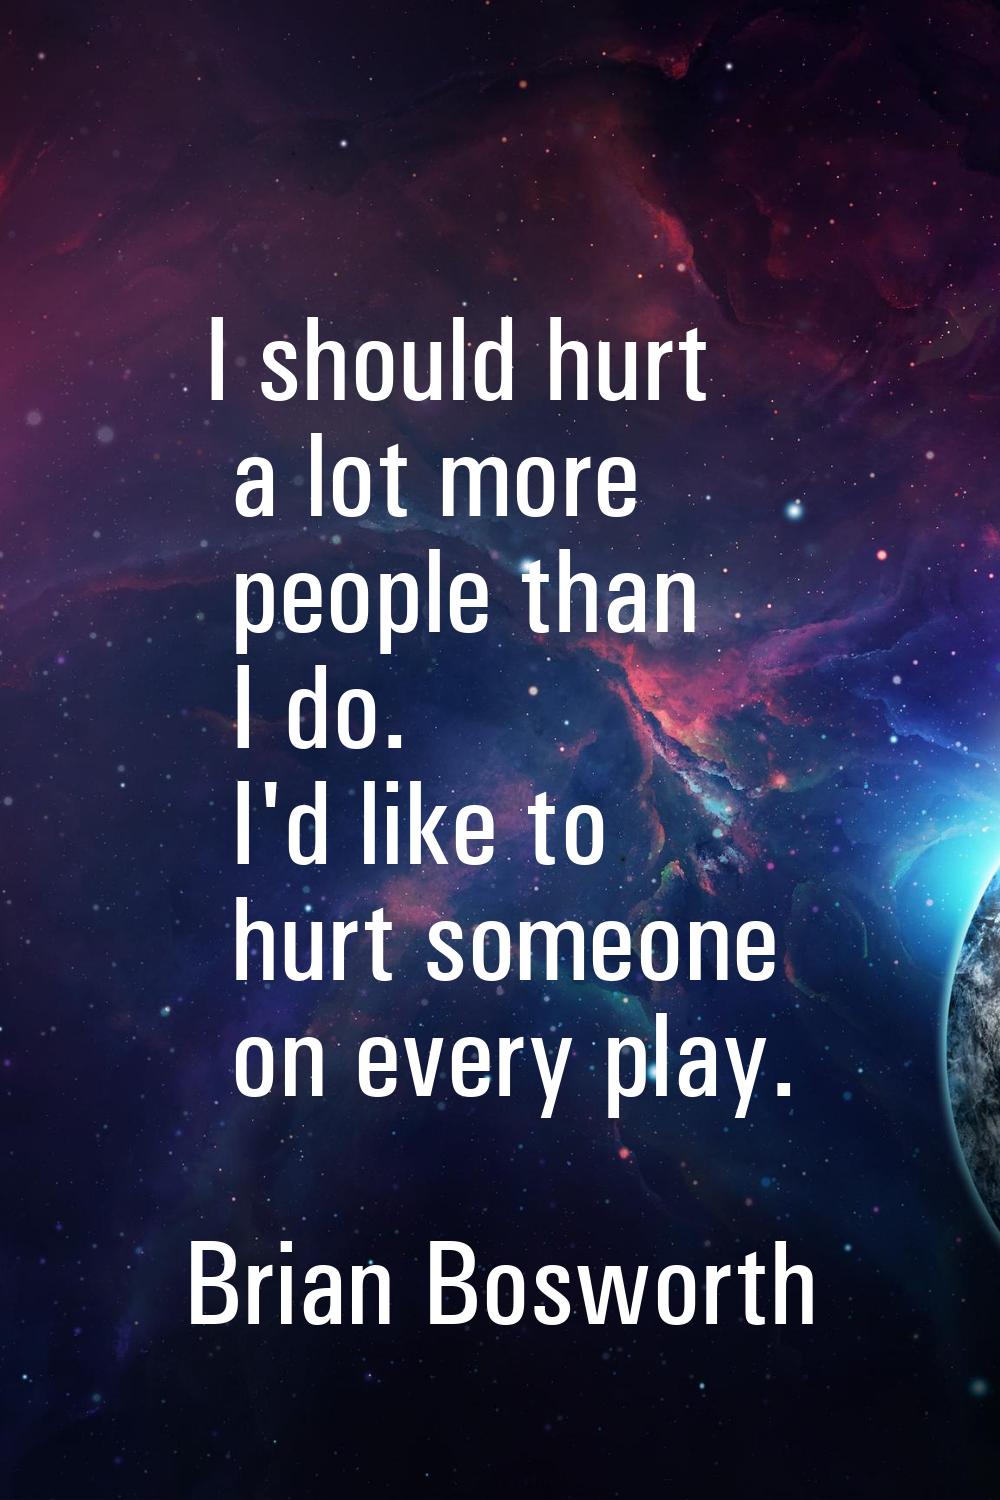 I should hurt a lot more people than I do. I'd like to hurt someone on every play.